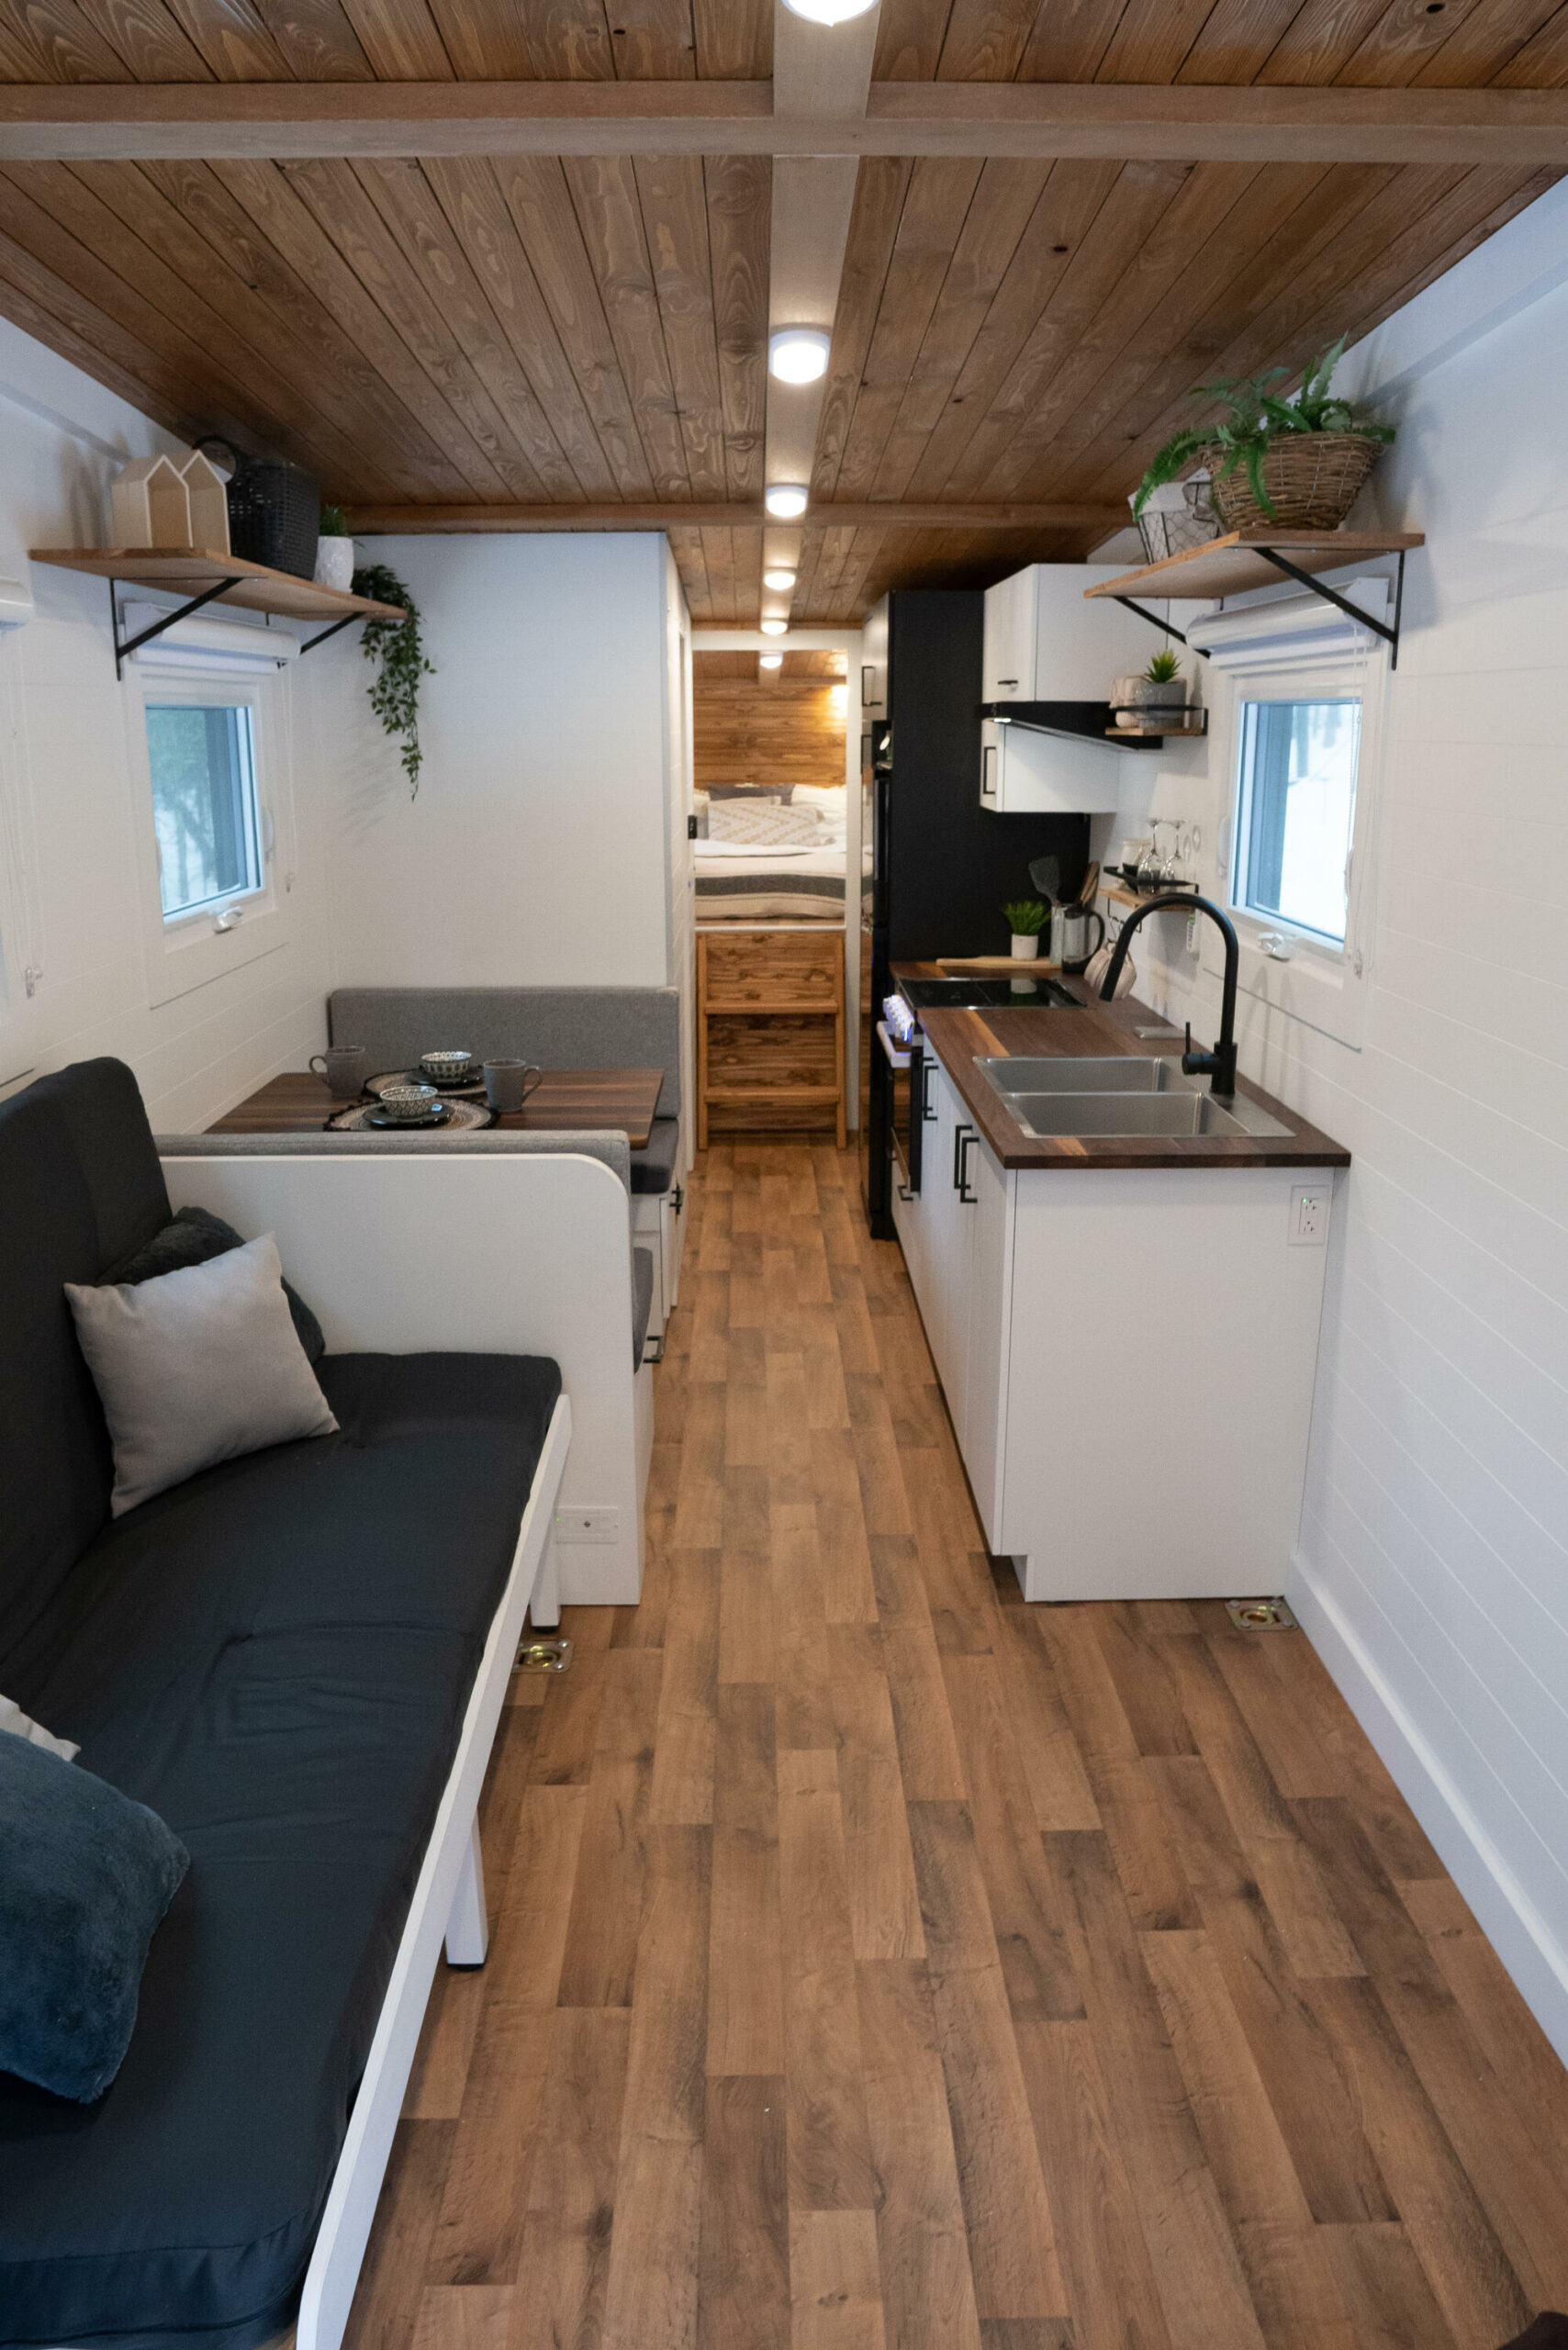 Living Area with Built-In Couch - Nomad 5th Wheel by Minimaliste